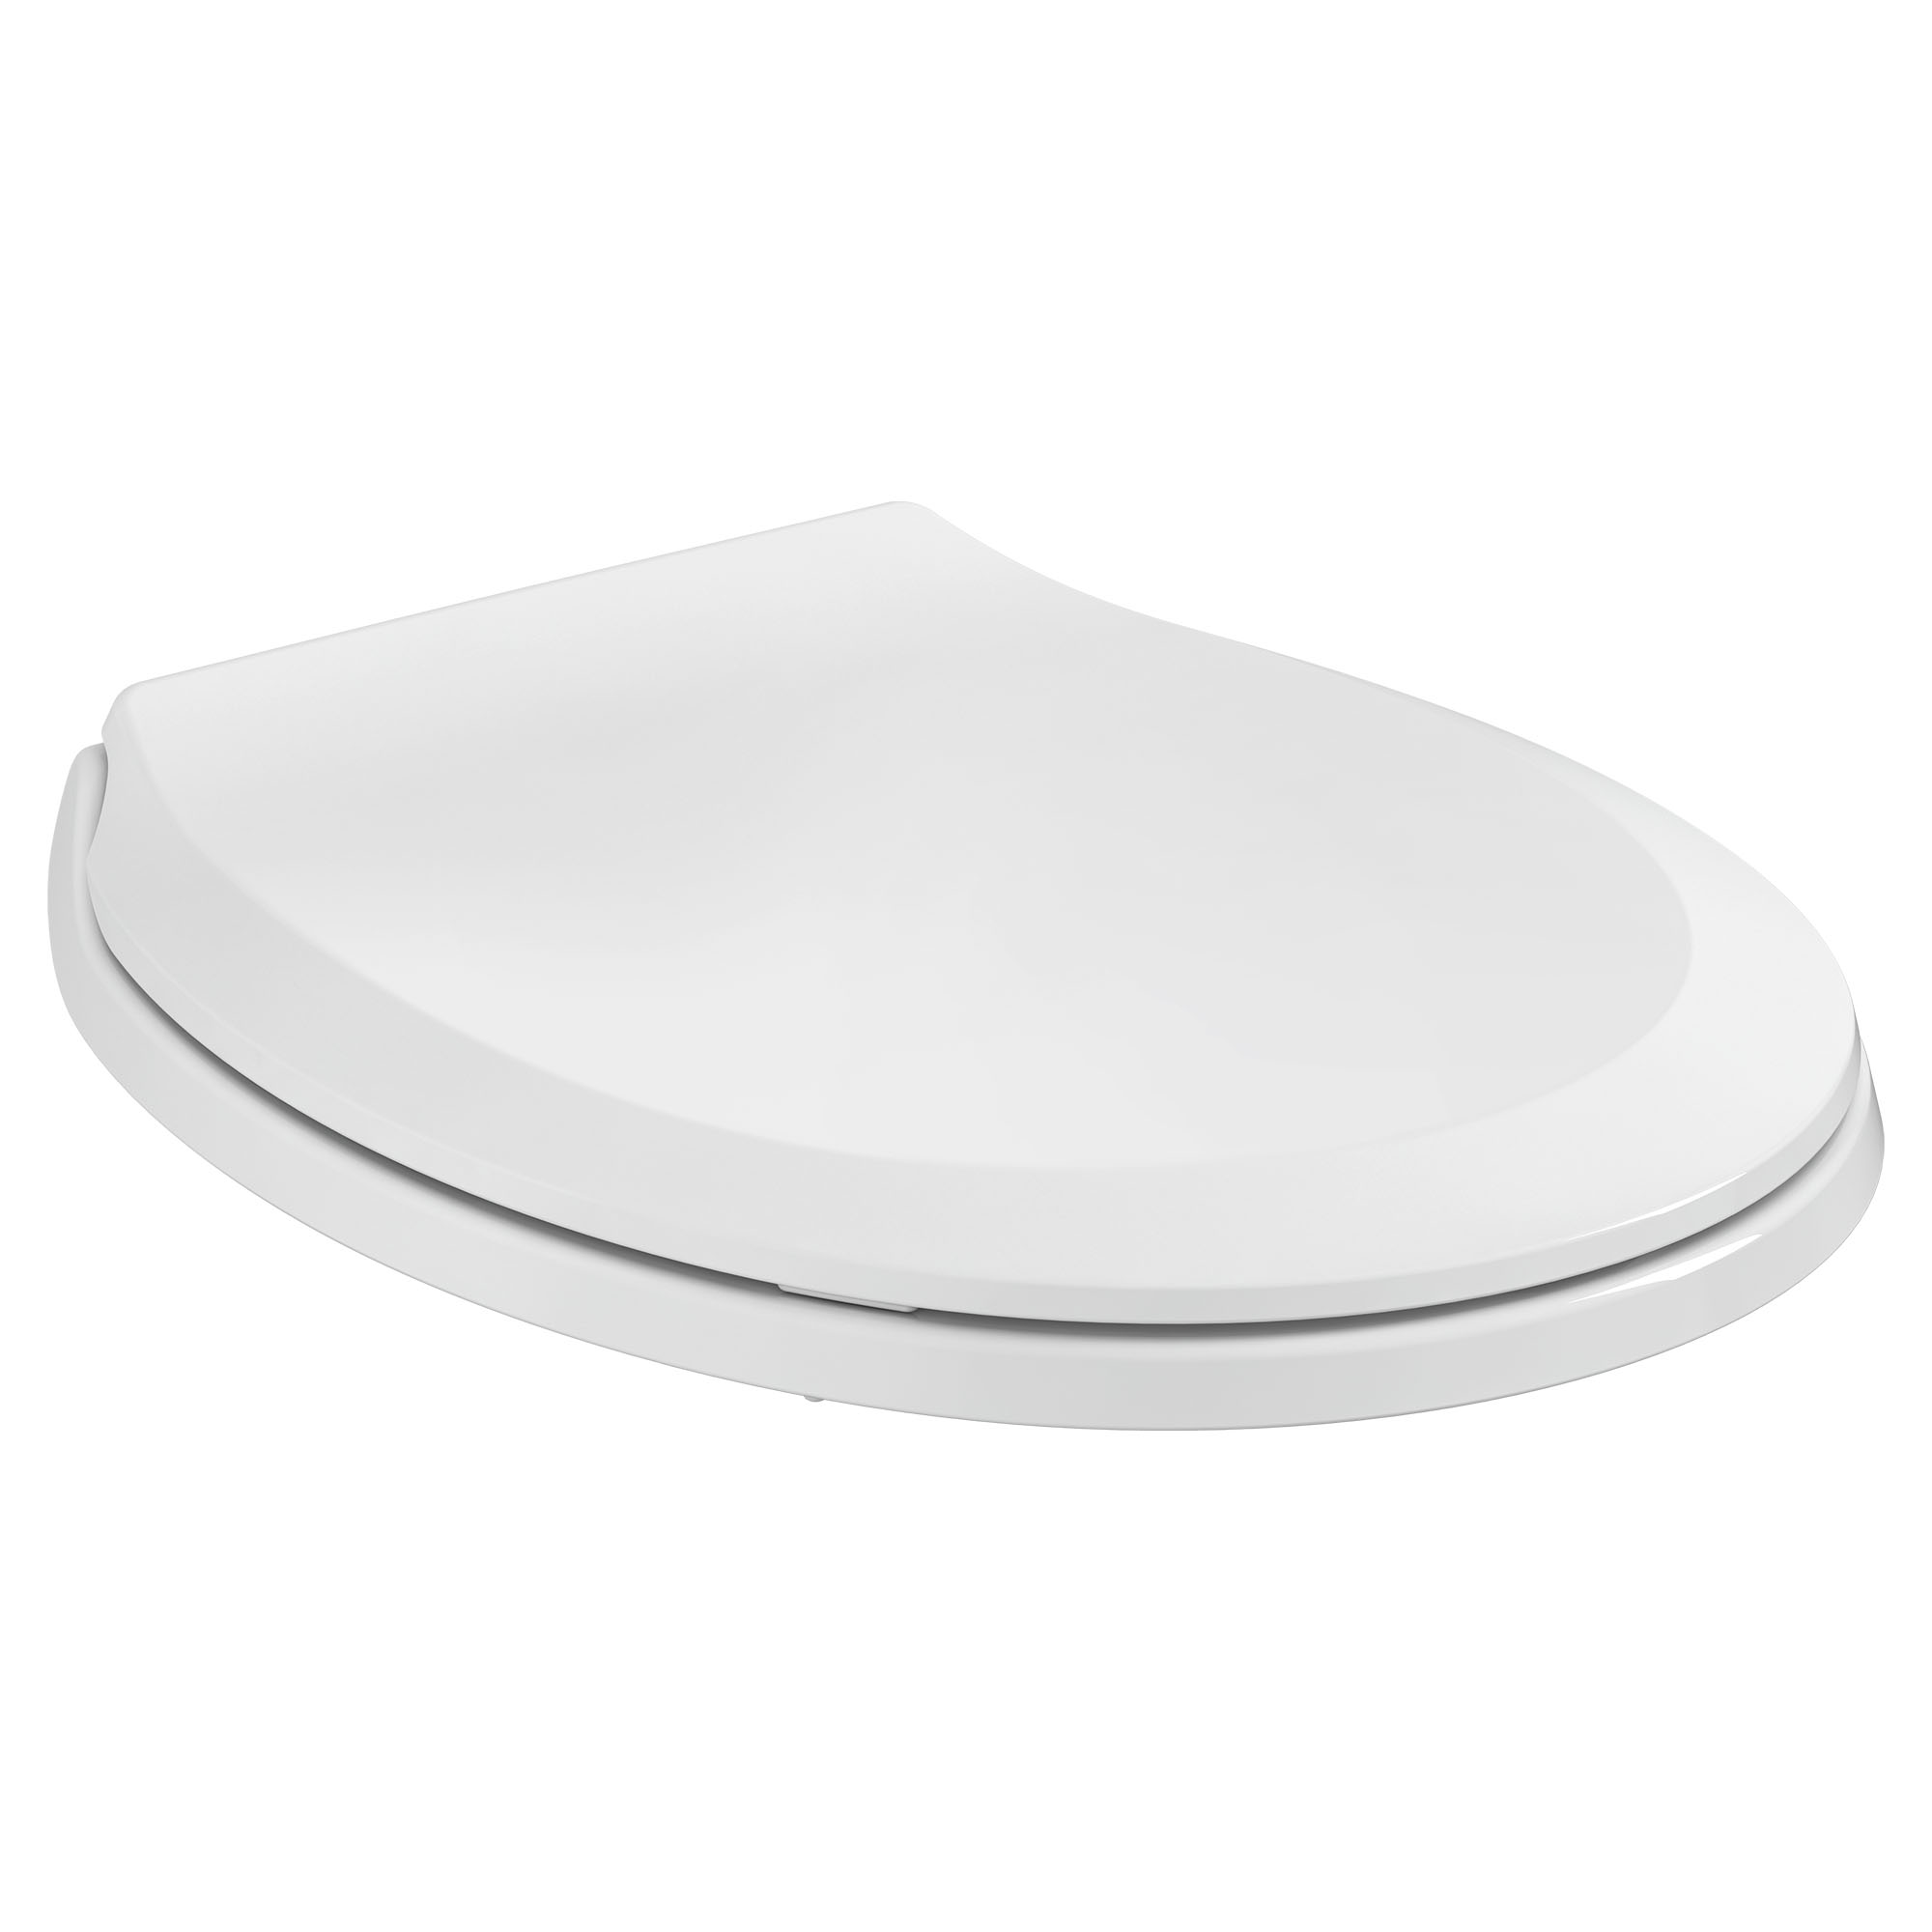 Transitional Slow-Close Round Front Toilet Seat